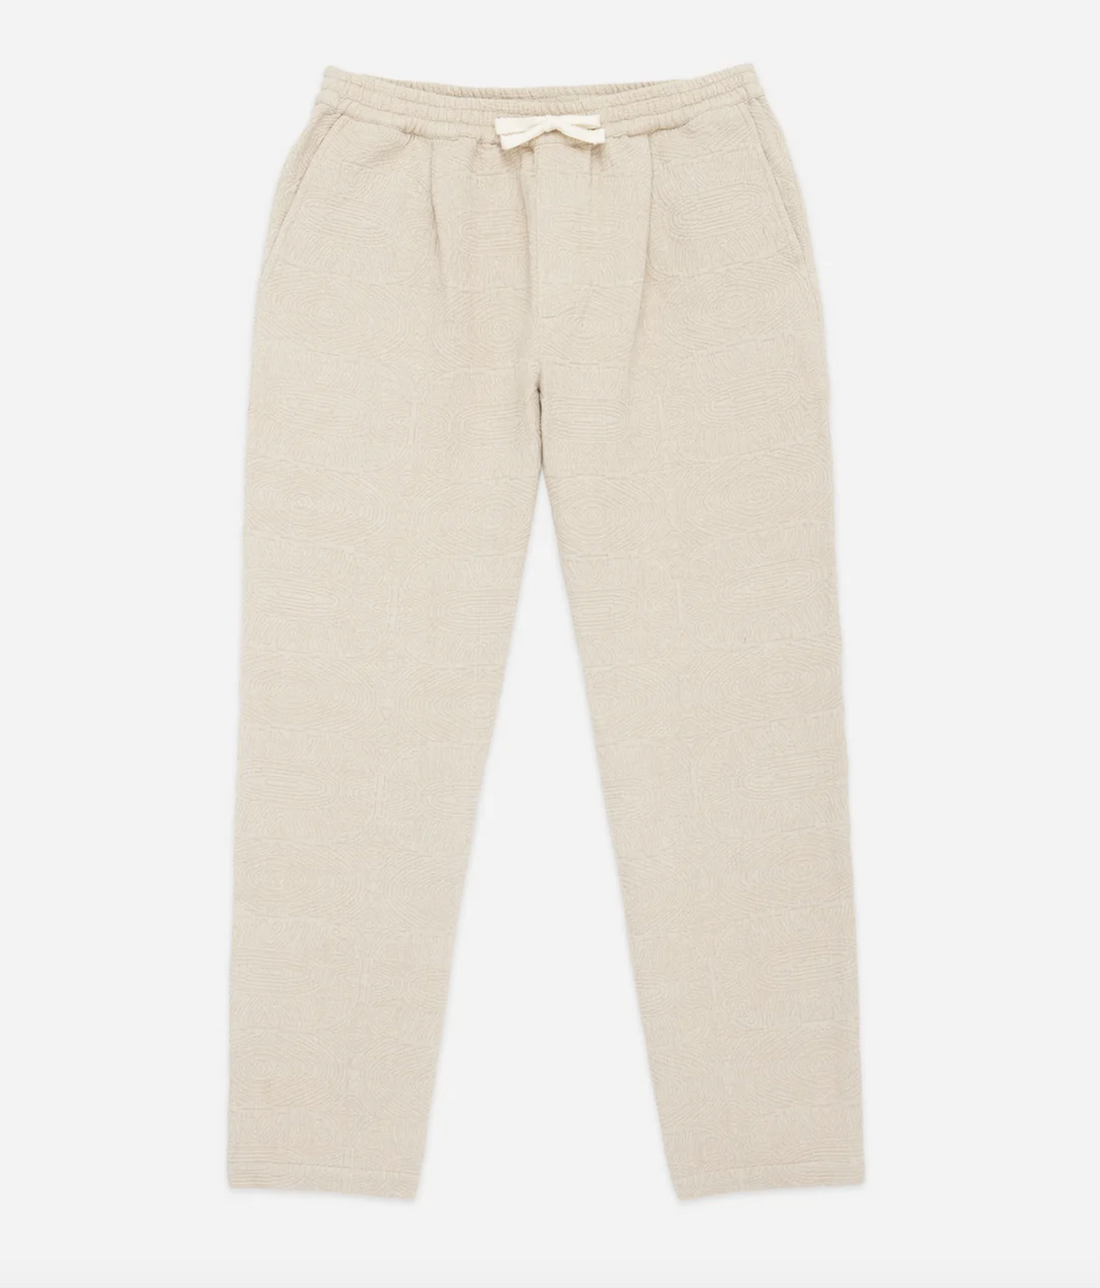 3sixteen - Easy Pant in Dry Garden Jacquard